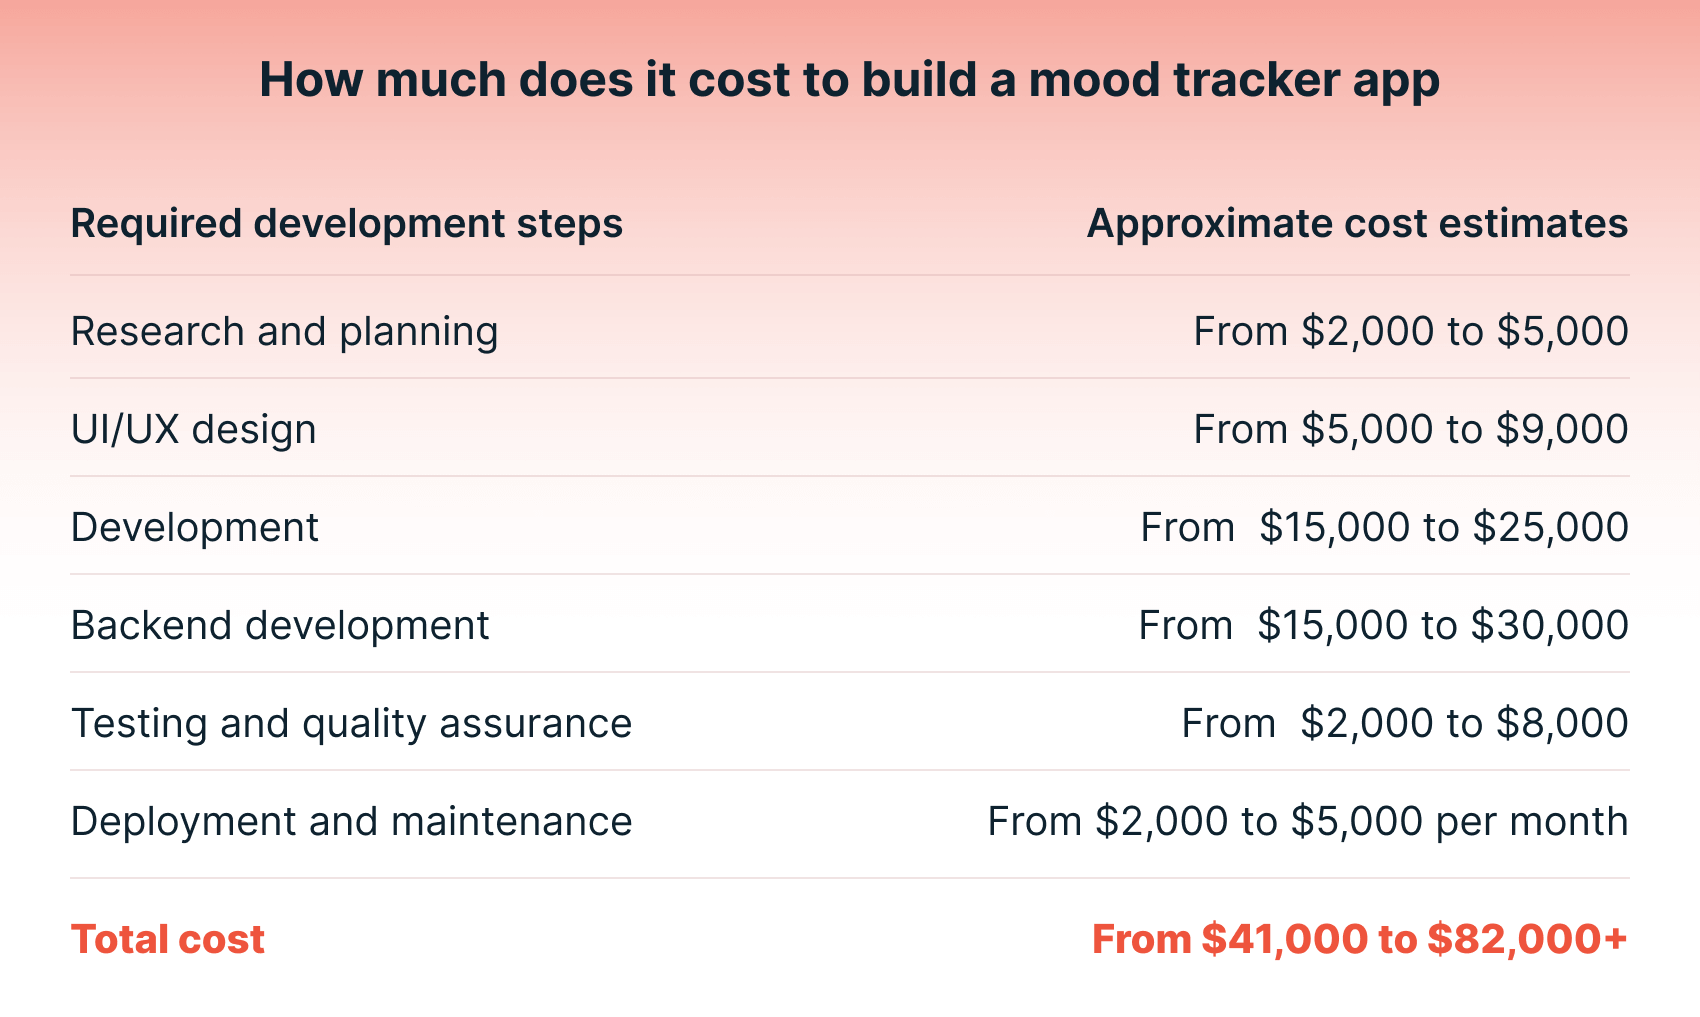 How much does it cost to build a mood tracker app